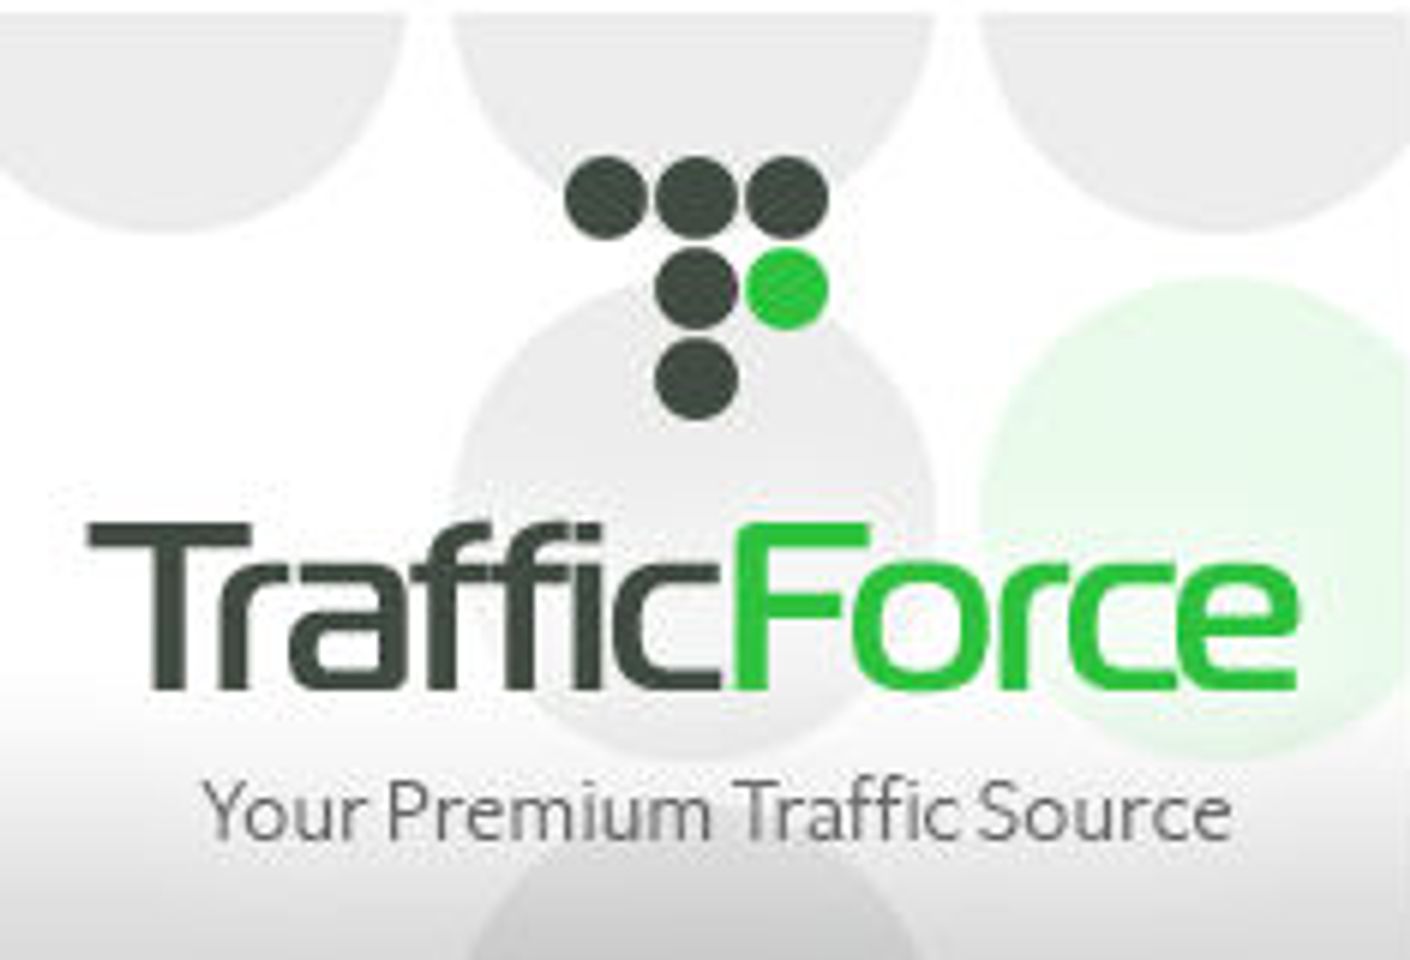 Traffic Force Adds More Run of Network Flexibility for Advertisers